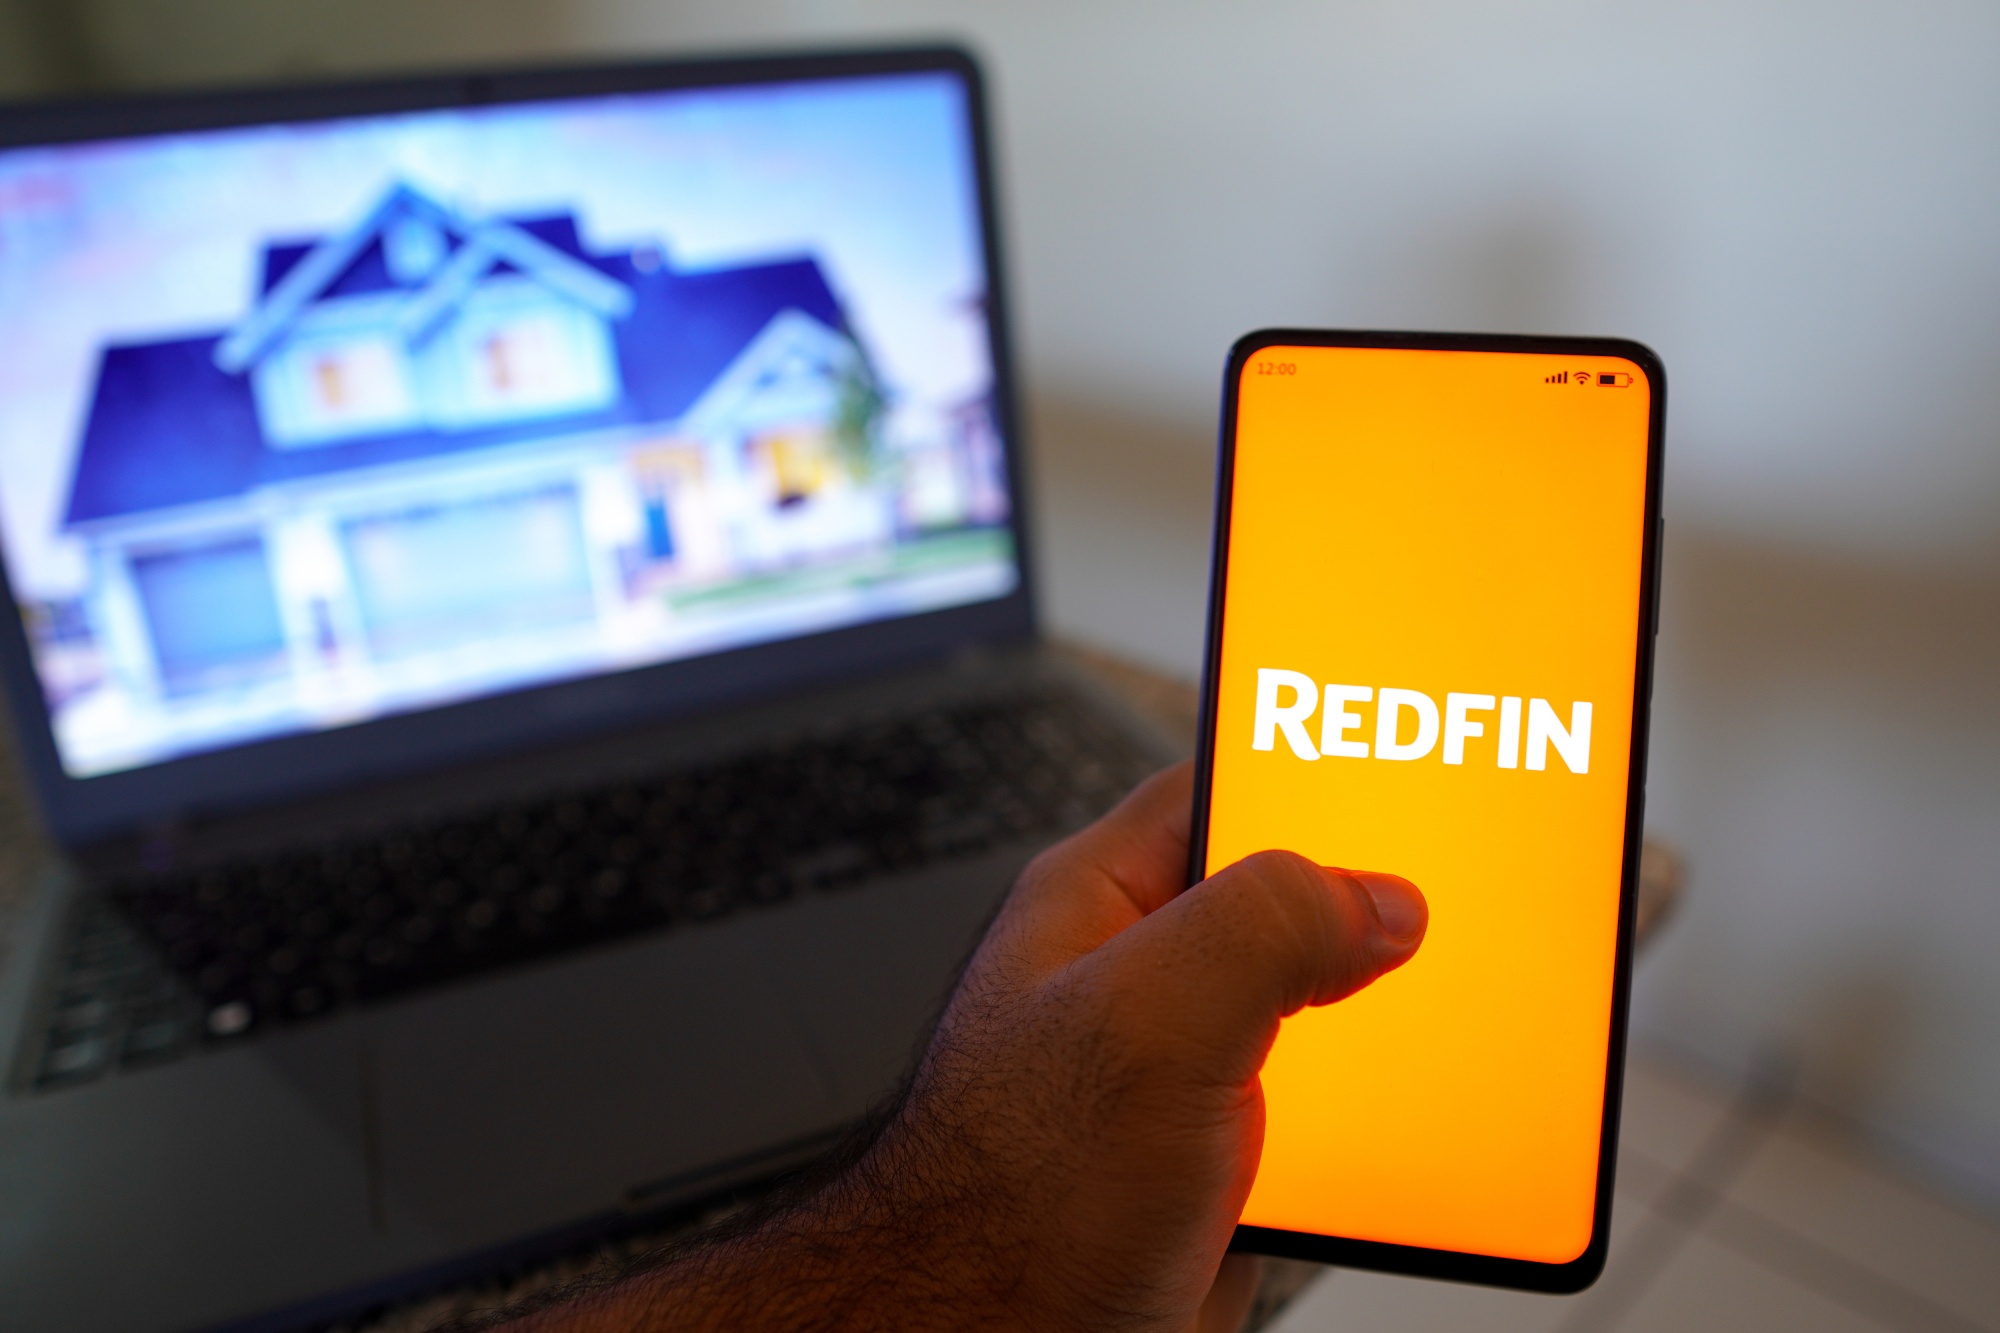 The Redfin logo seen displayed on a smartphone.